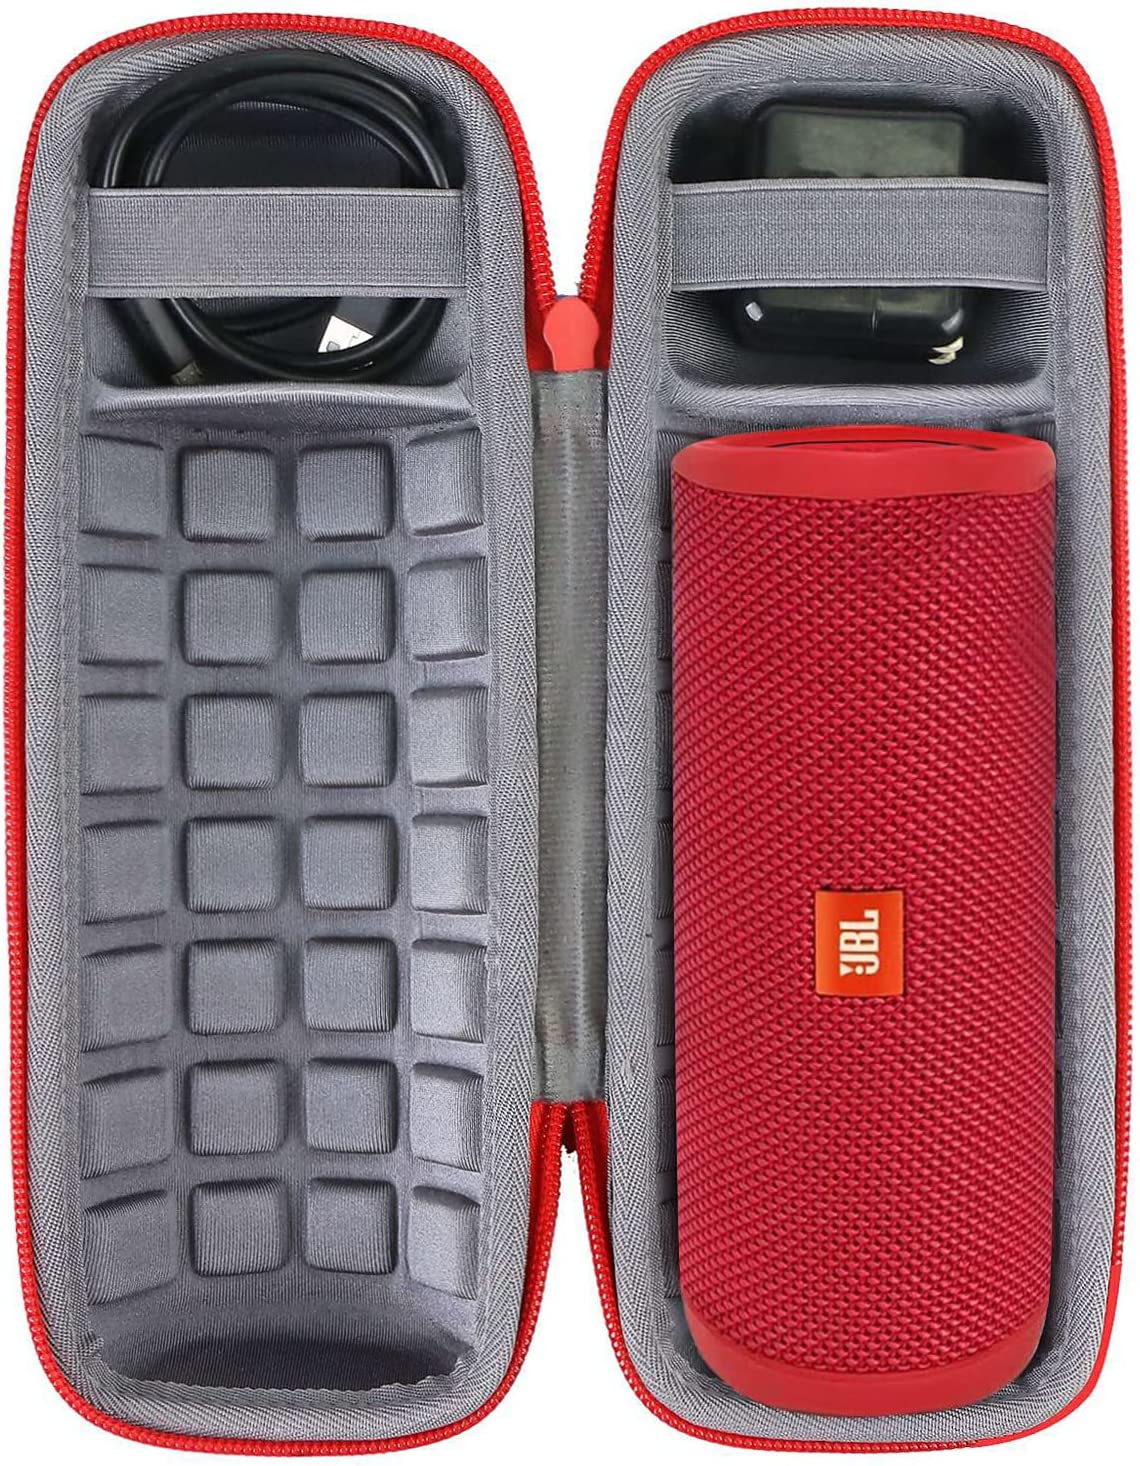 JBL Charge 4 Red Portable Bluetooth Speaker w/Case 